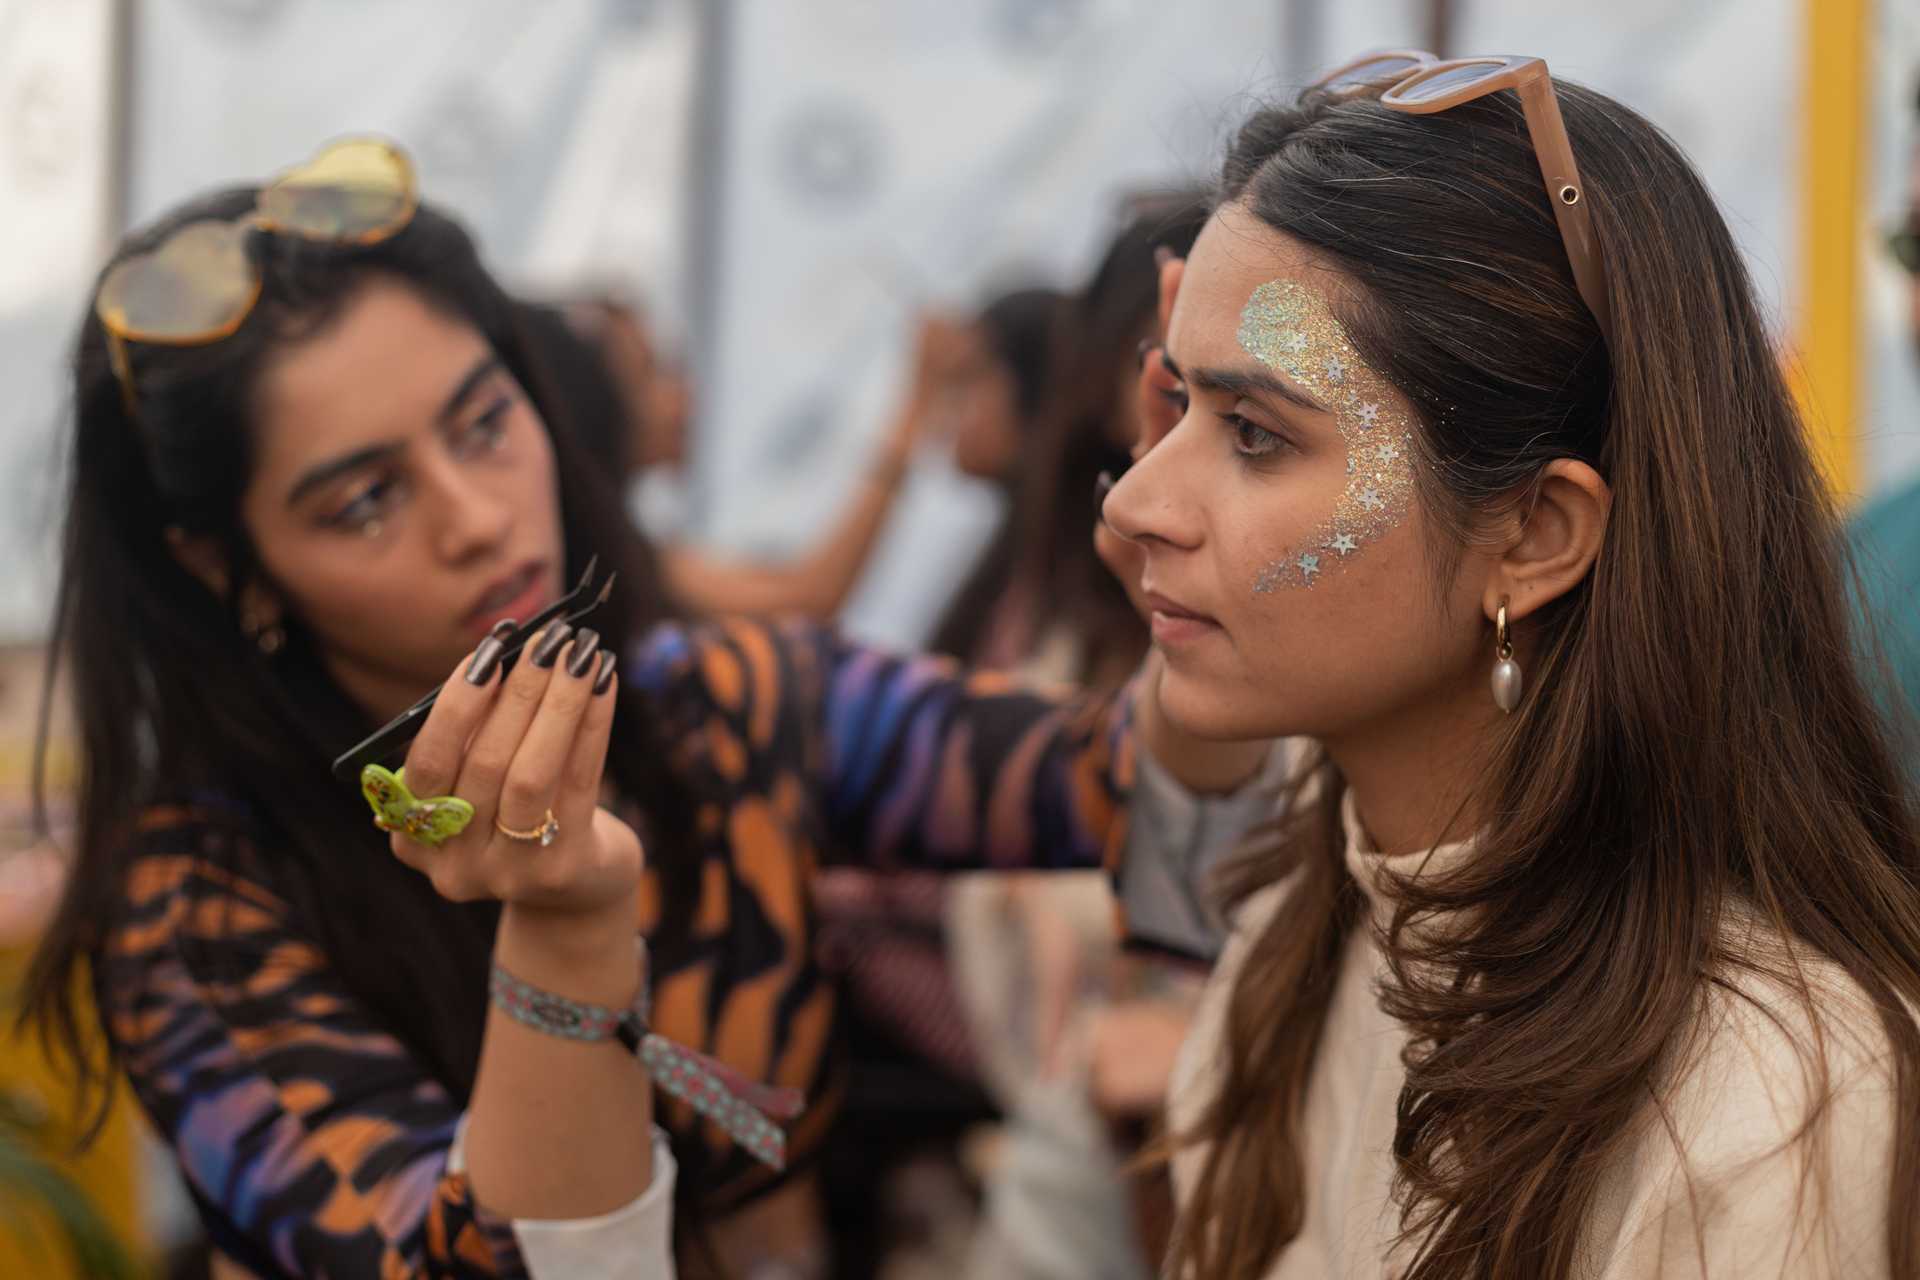 Attendees got festival ready at the Bumble Hive - Image - Polina Schapova